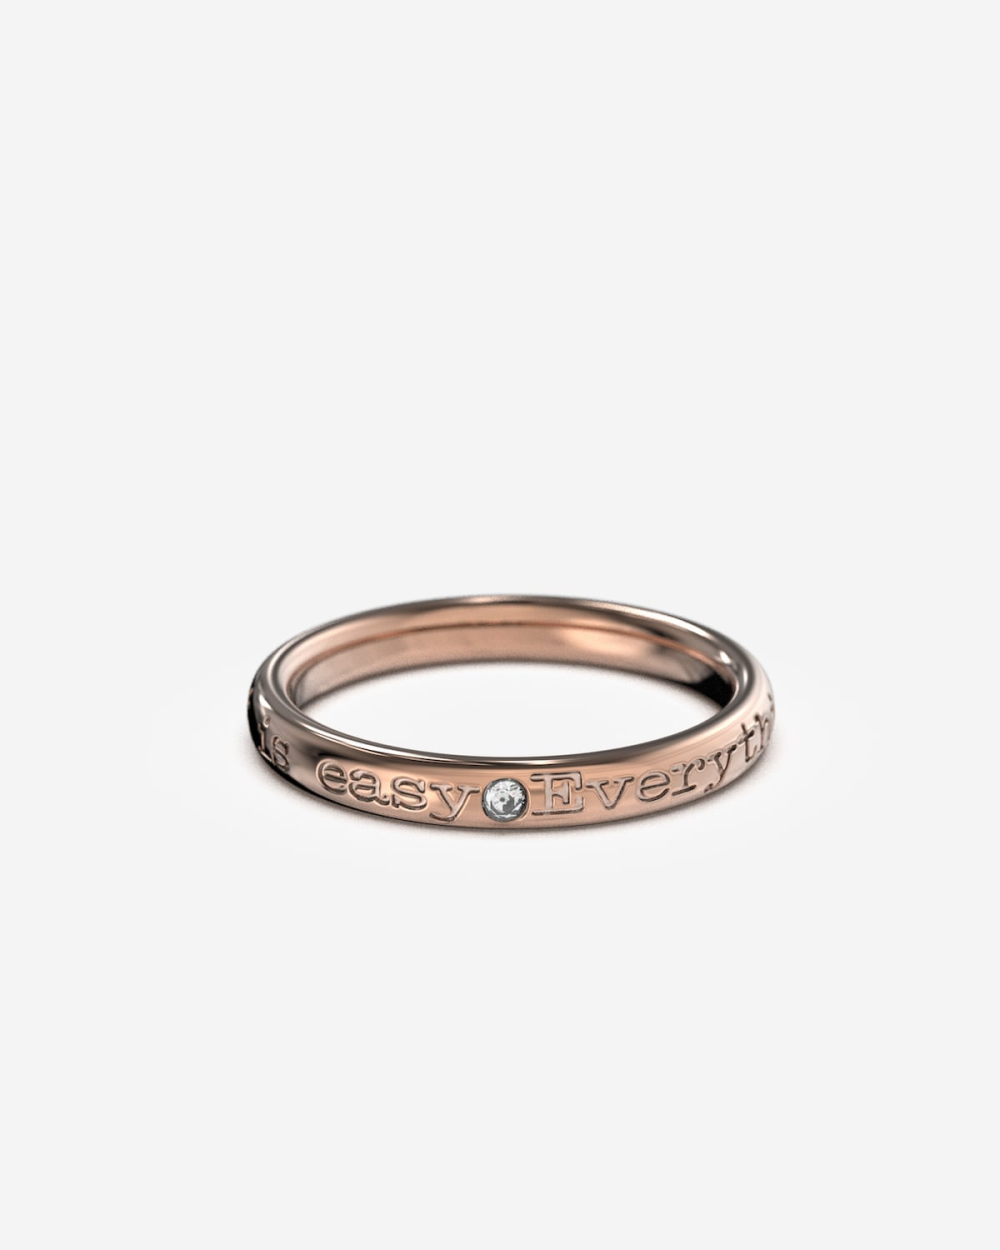 GOLD CONFORT WEDDING RING WITH...